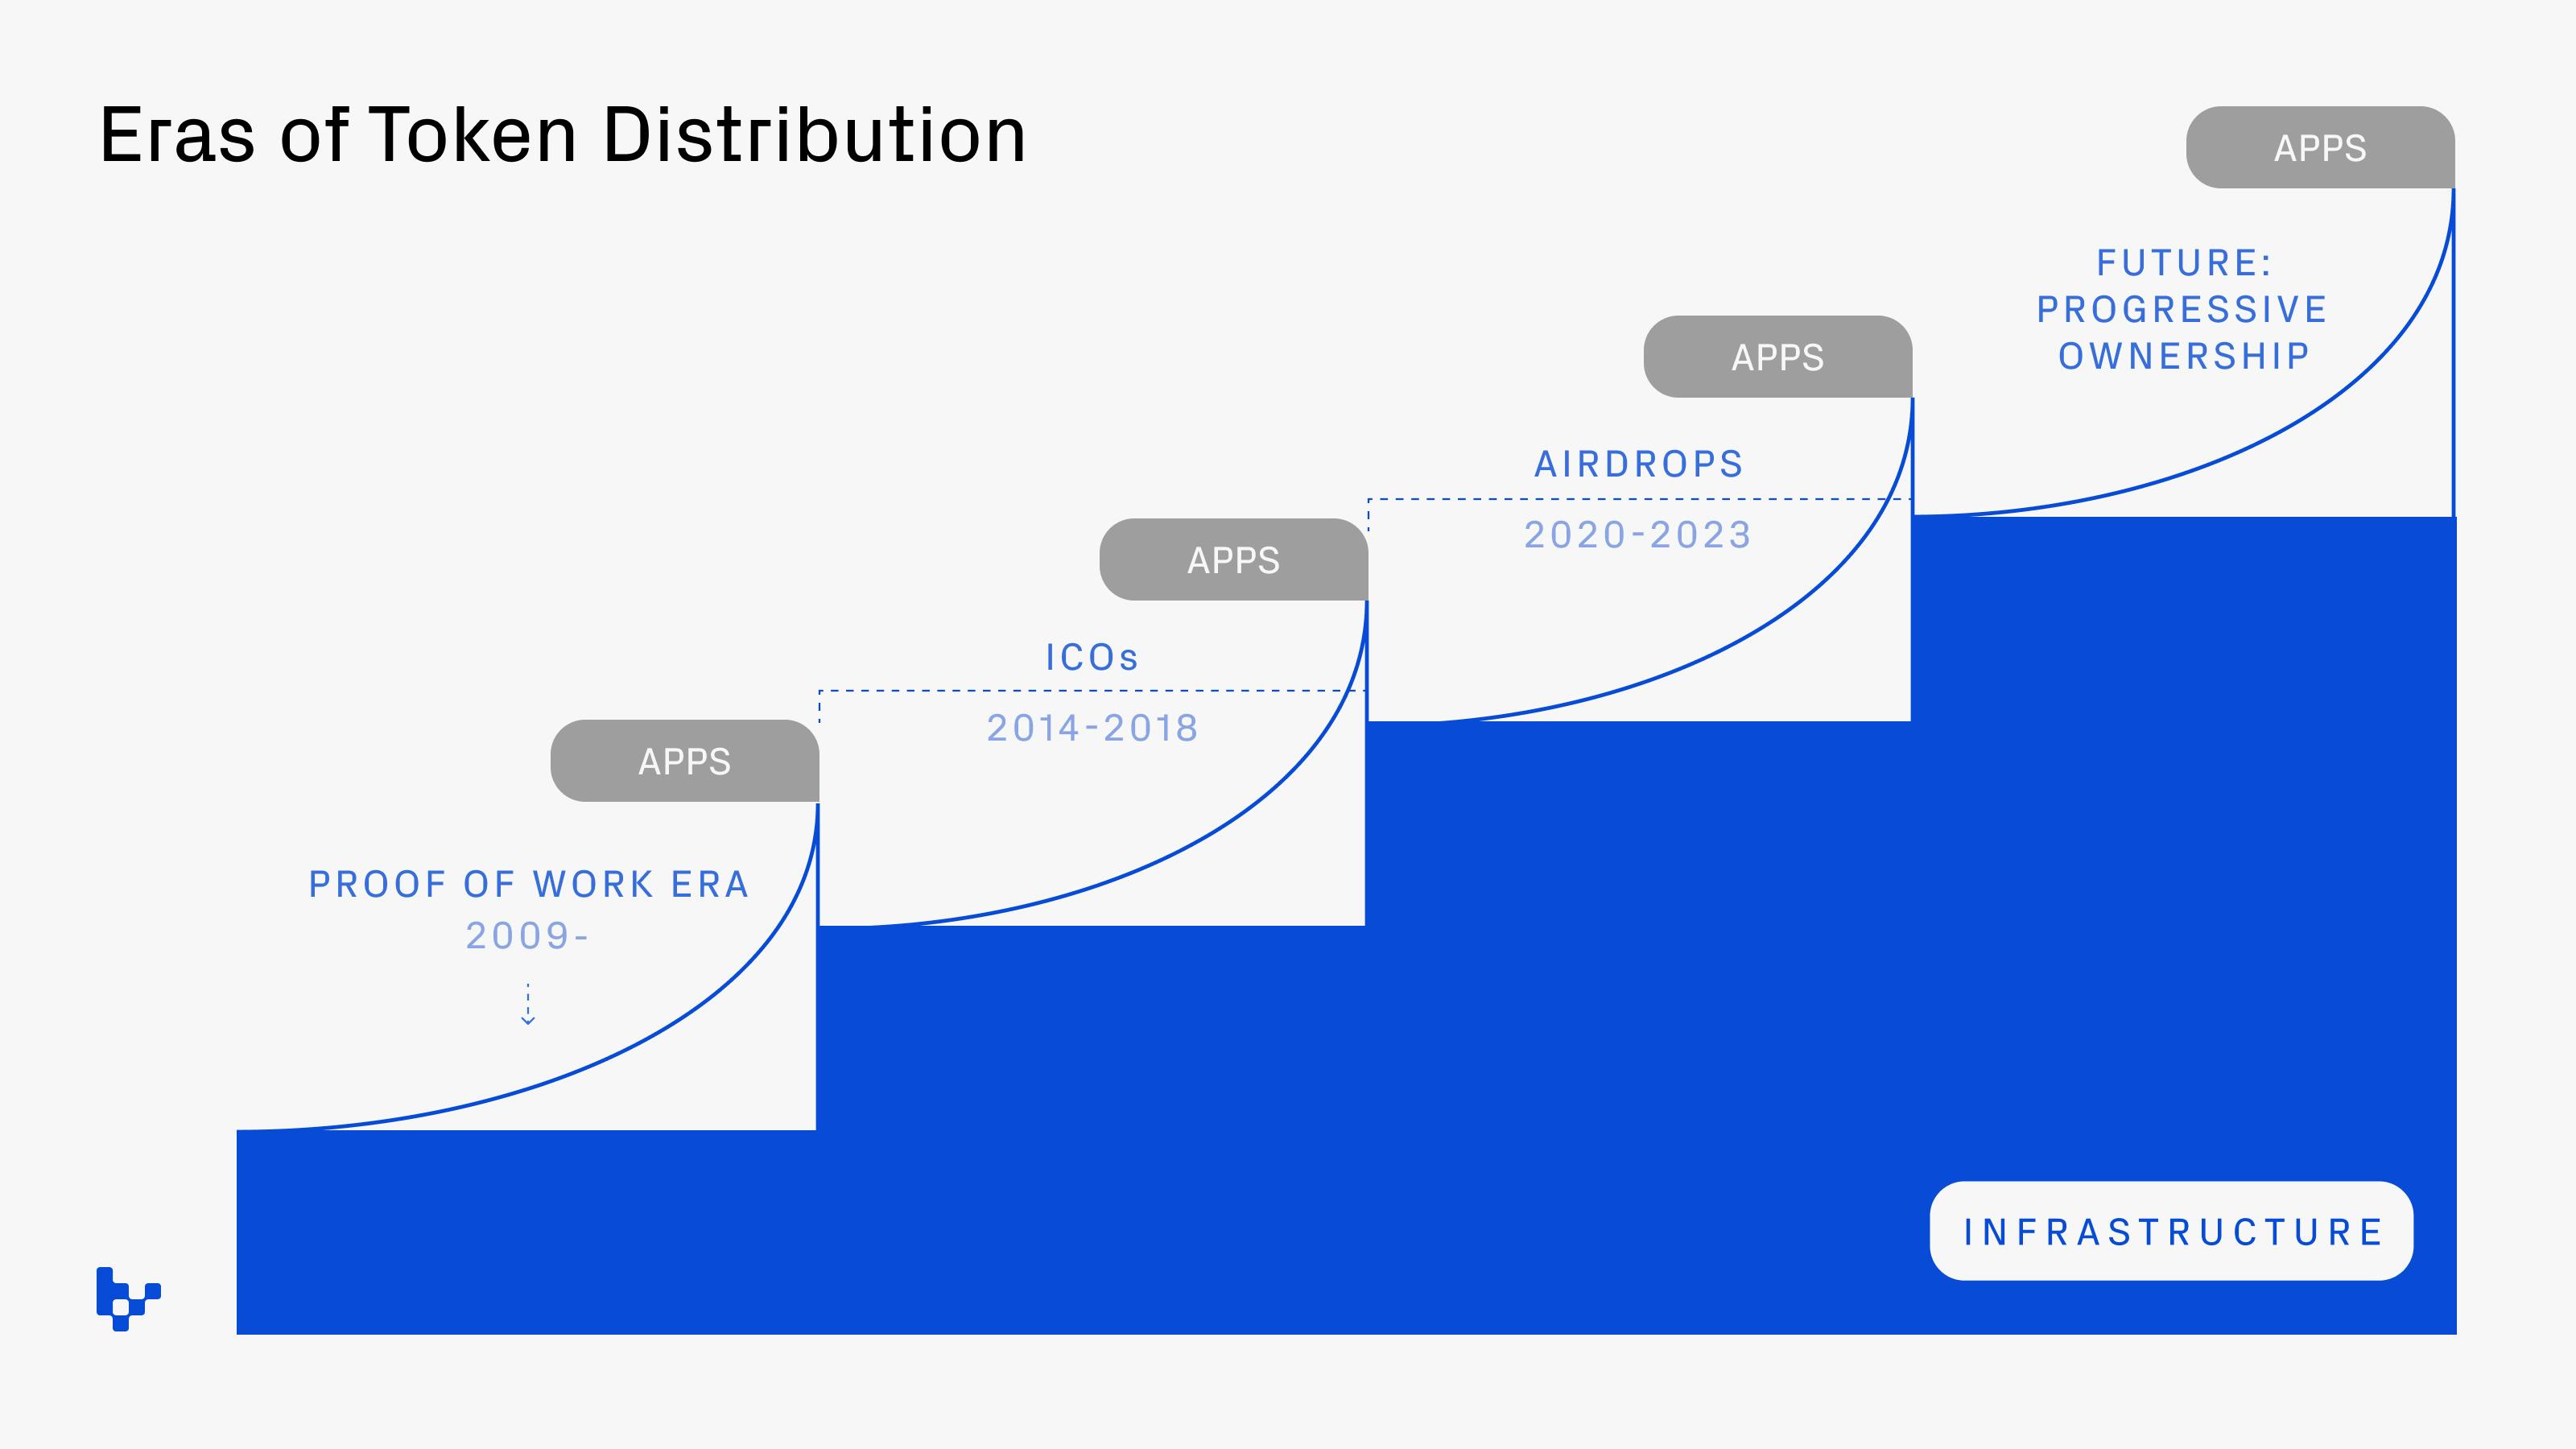 Each era of token distribution spurred growth and development of applications.Credit: inspired by app/infrastructure cycles 